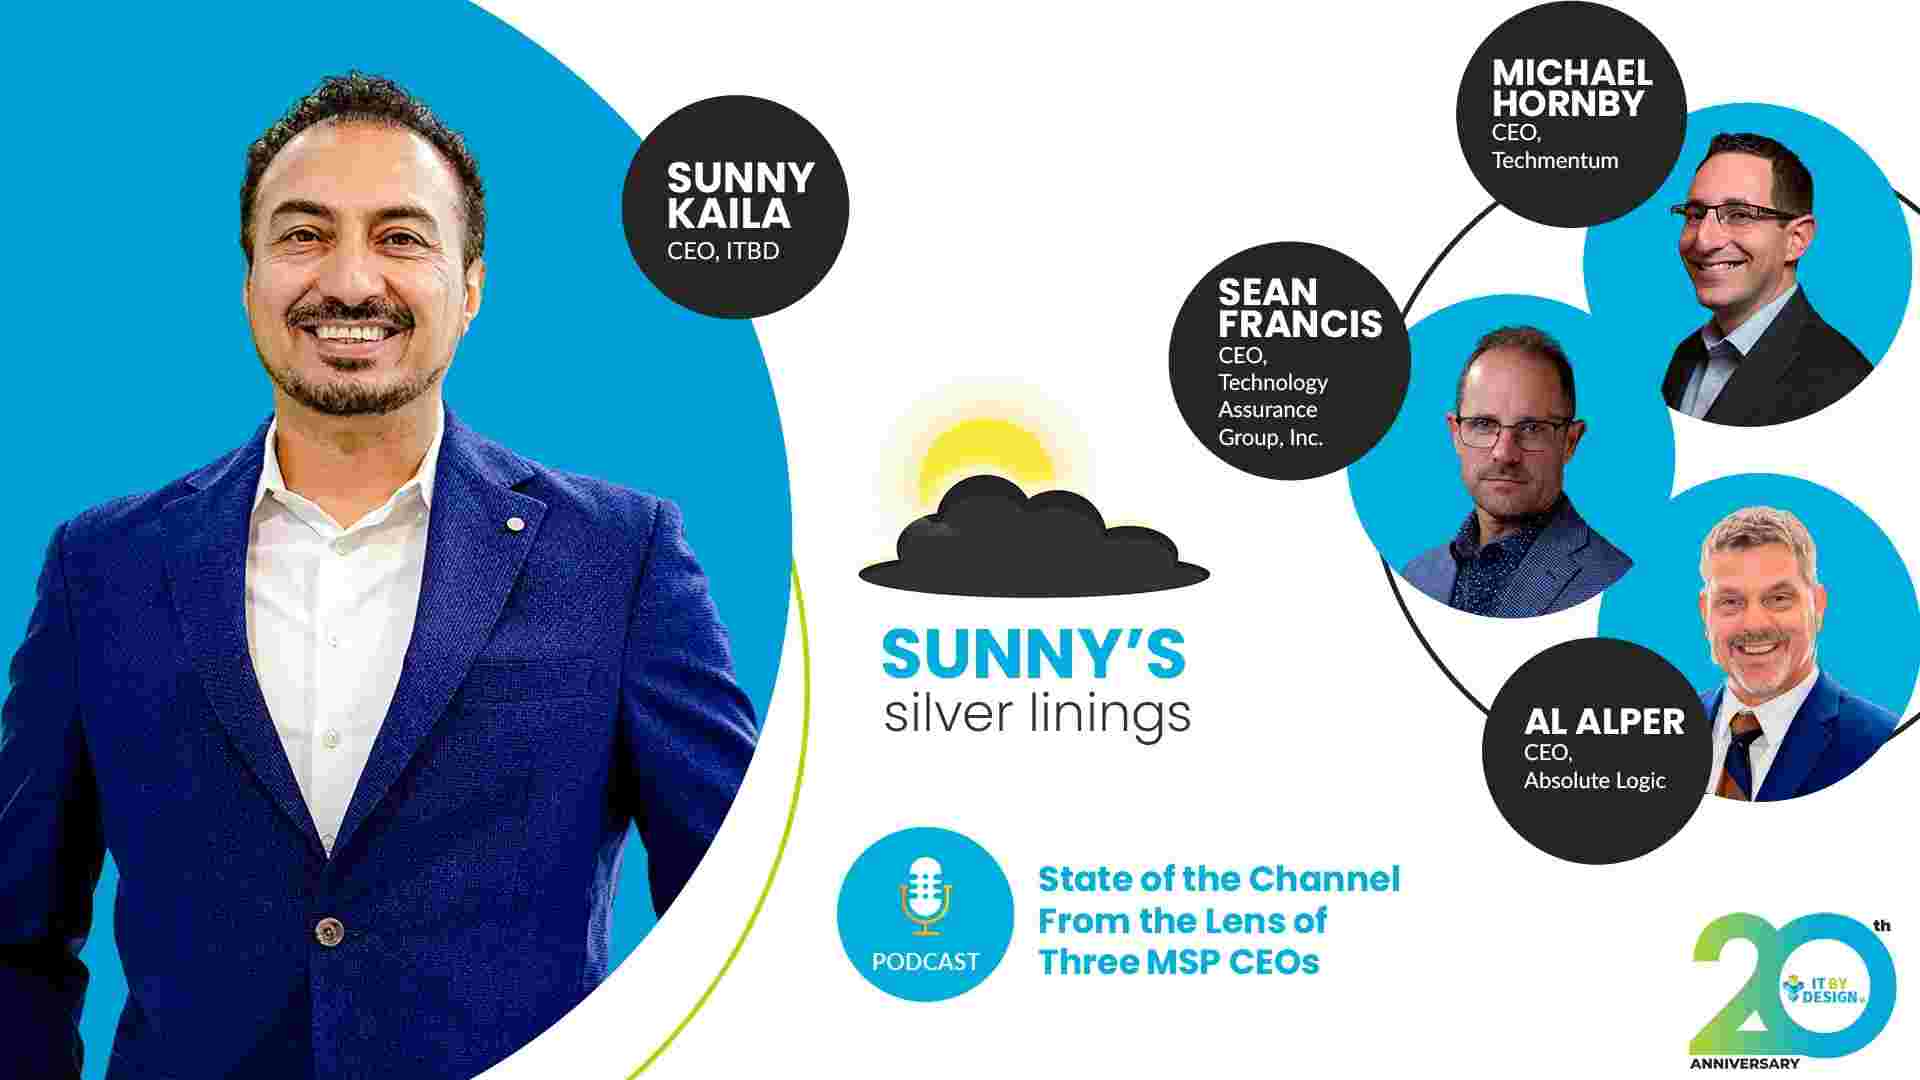 State of the Channel From the Lens of Three Channel CEOs